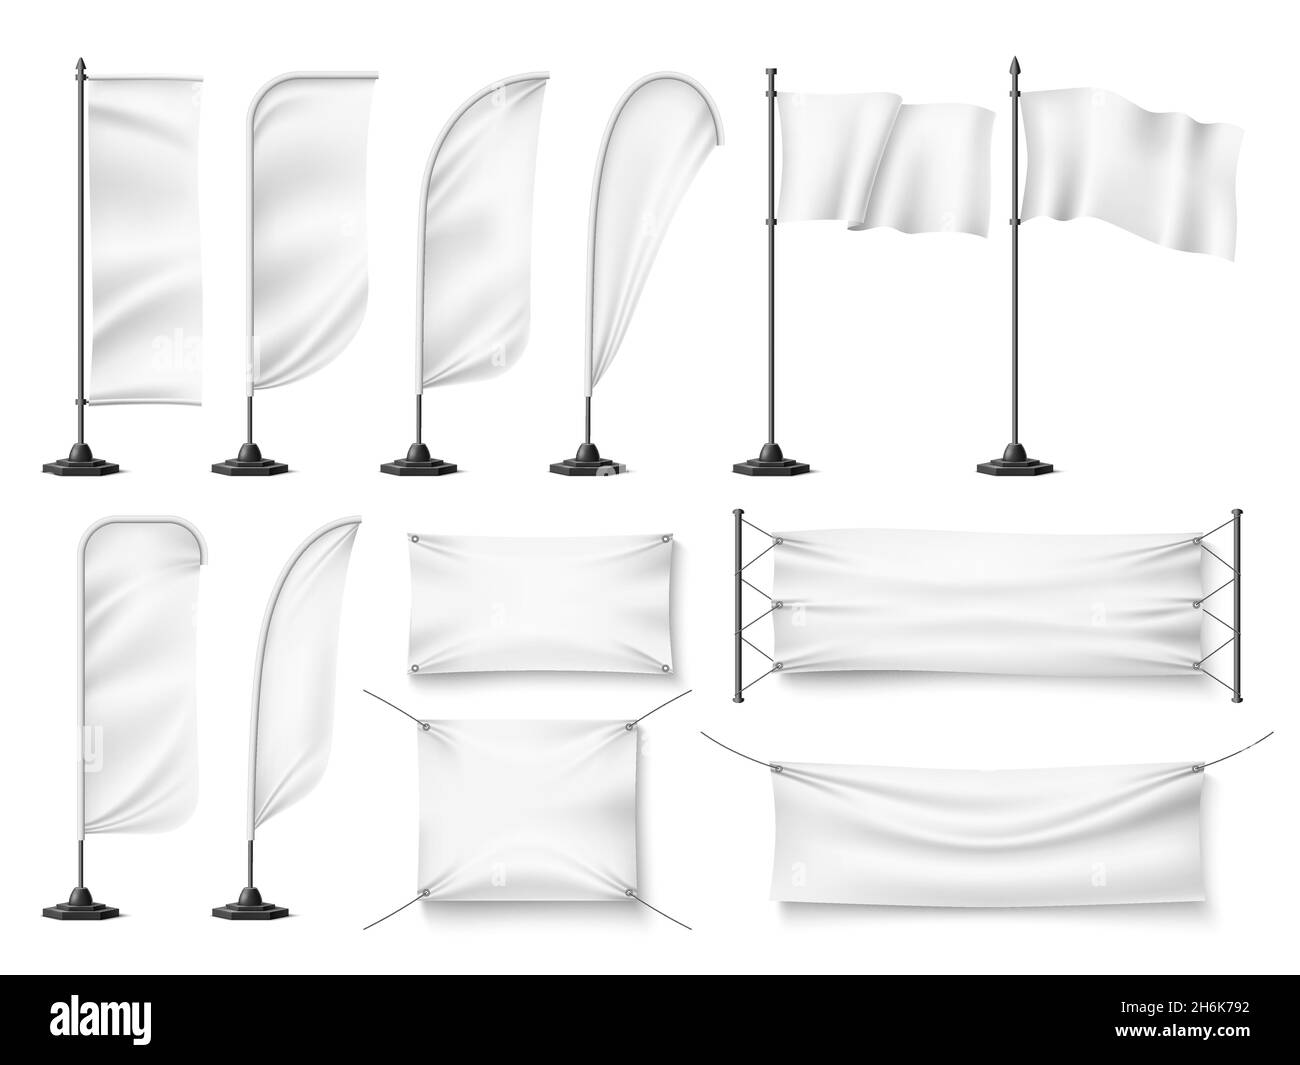 Flags and banners mockup. Realistic white textile blank promotional templates on flagstaffs, advertising clean fabric canvases. Vector set Stock Vector